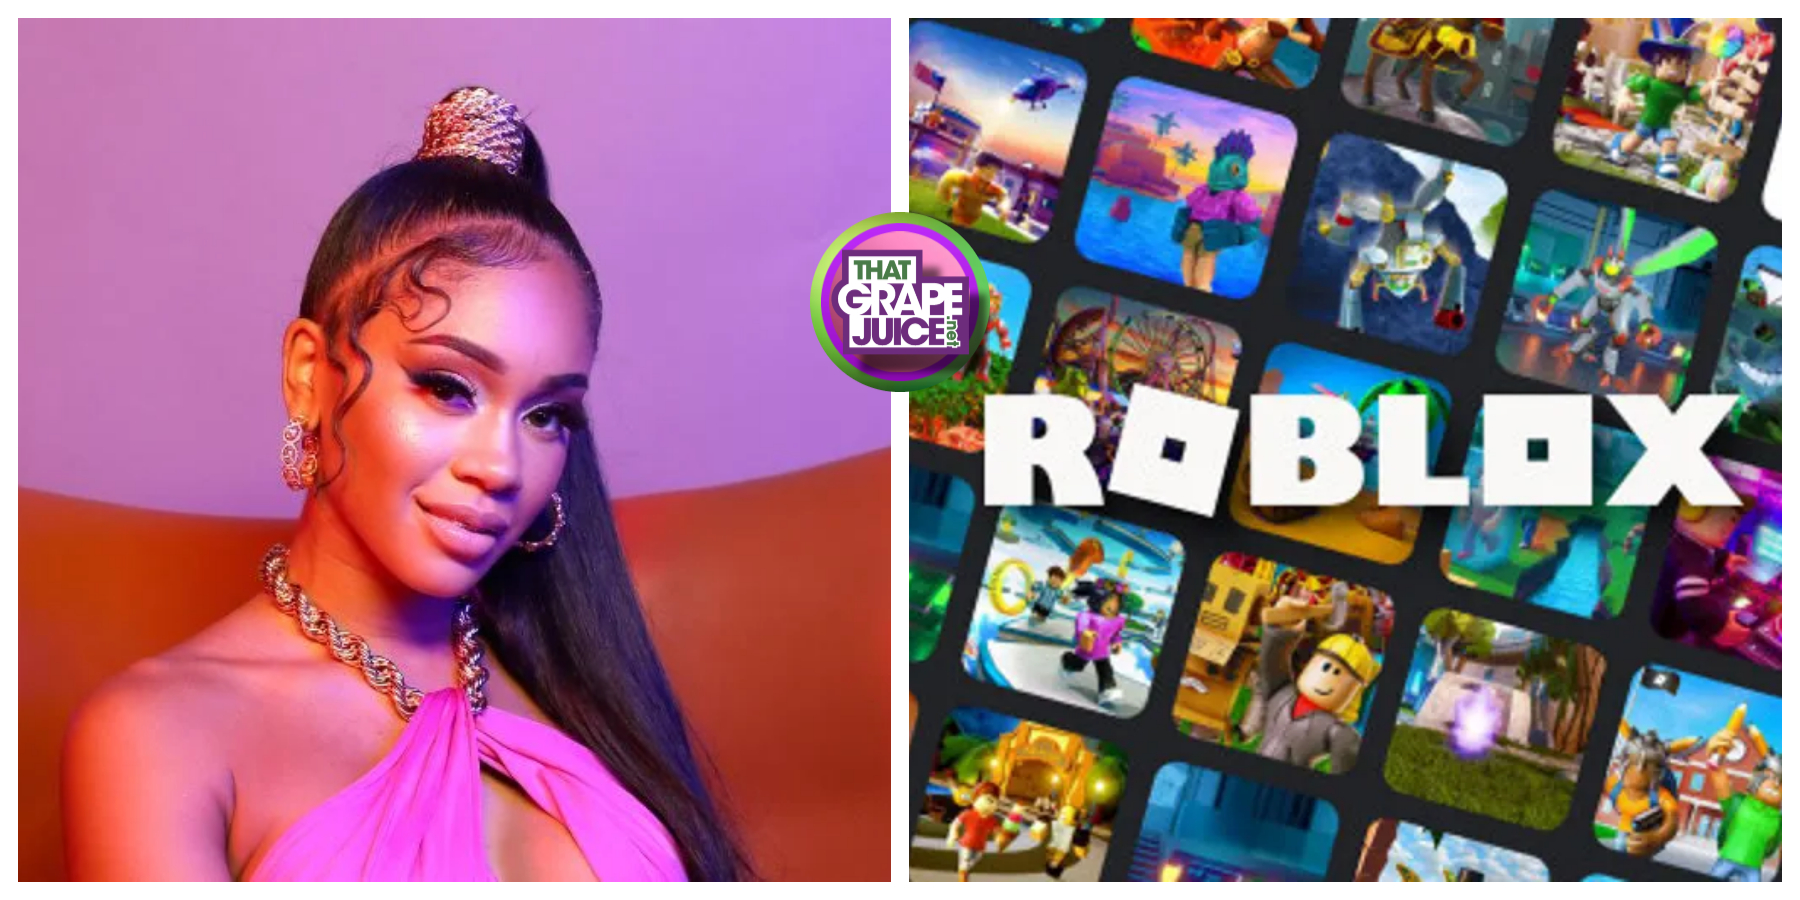 Saweetie Set to Perform Virtual Super Bowl Concert in Roblox